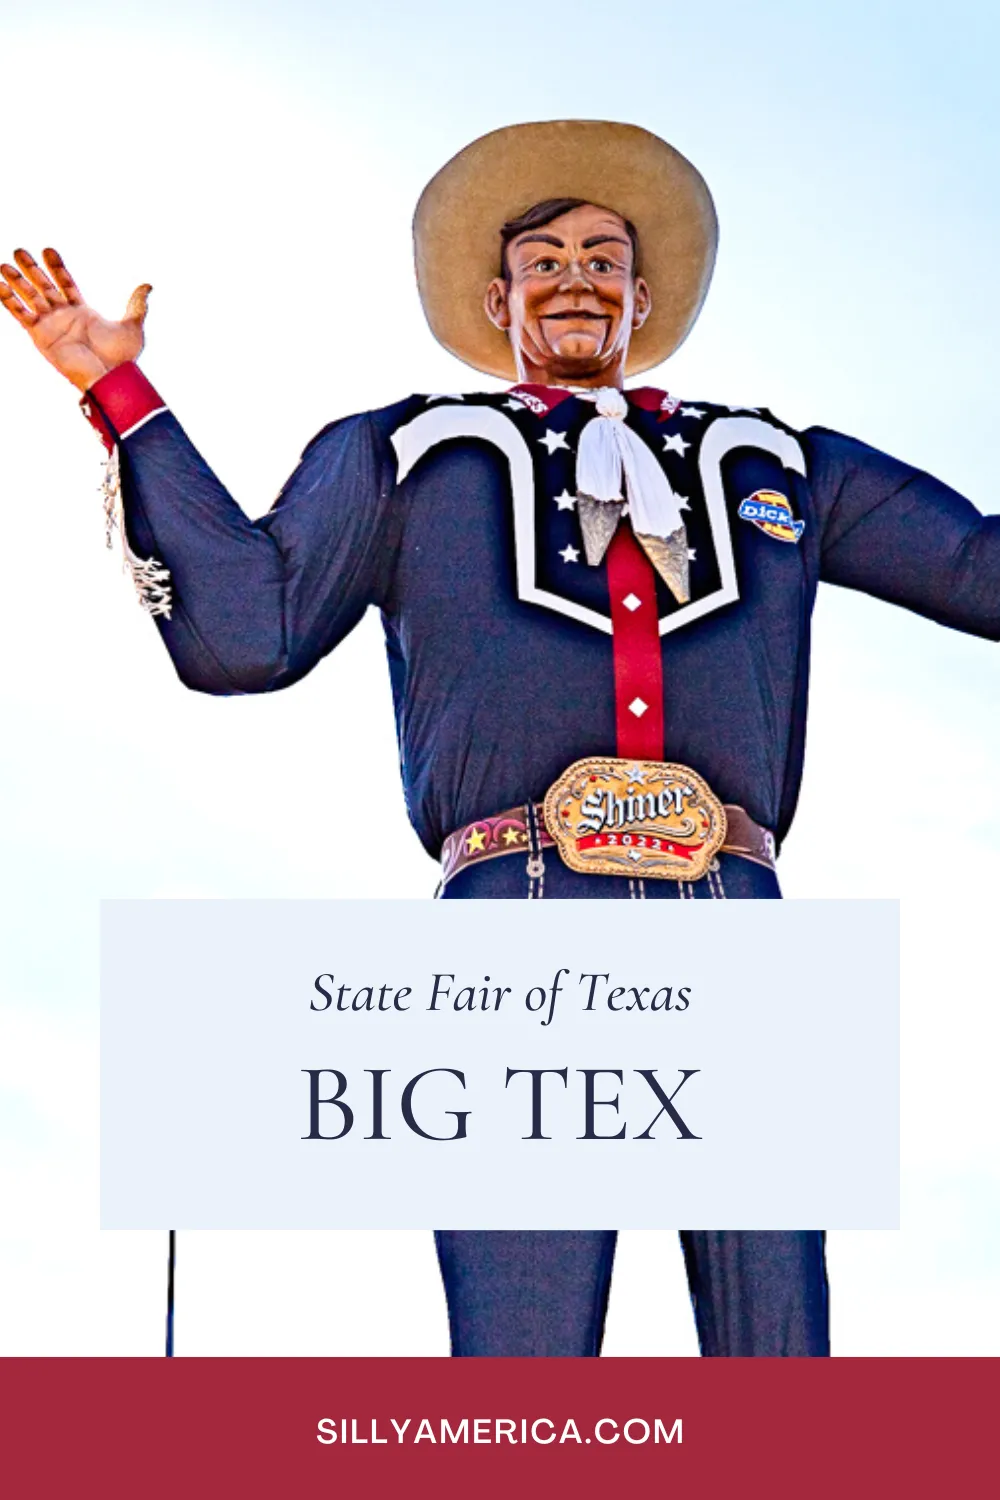 "Howdy, Folks!" This roadside attraction might just be the most recognizable man in Texas, which is saying a lot considering he only makes a brief appearance each year. Big Tex in Dallas, Texas is an icon and ambassador who has been delighting visitors to the State Fair of Texas since 1952. Visit this Texas roadside attraction on your Texas road trip to the state fair! #StateFair #RoadsideAttraction #StateFairOfTexas #Texas #TexasRoadsideAttraction #RoadTrip